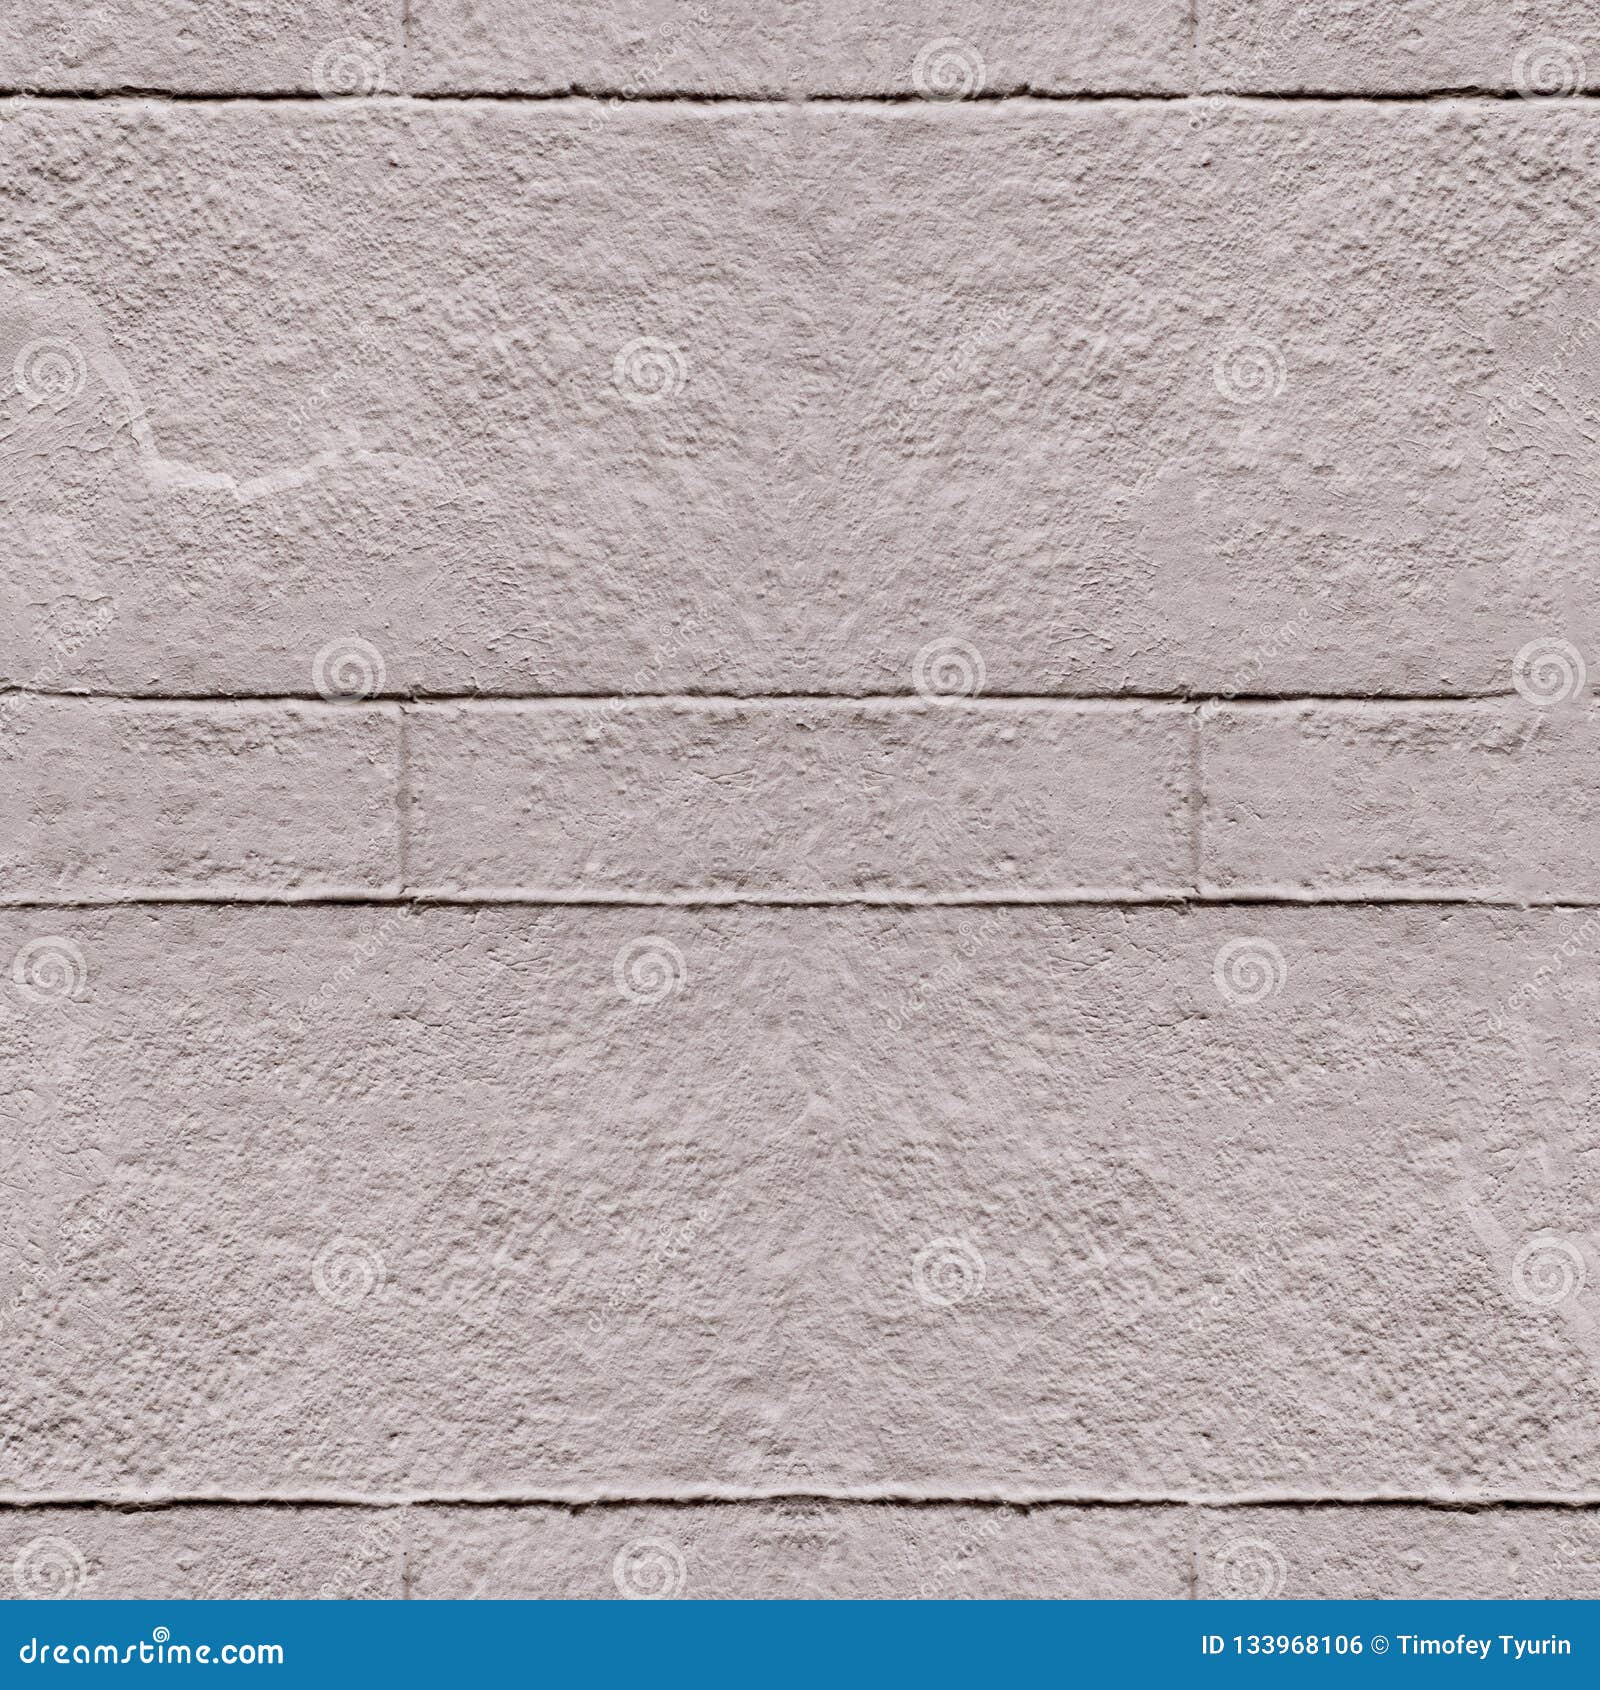 Seamless Wall Texture Images - Free Download on Freepik